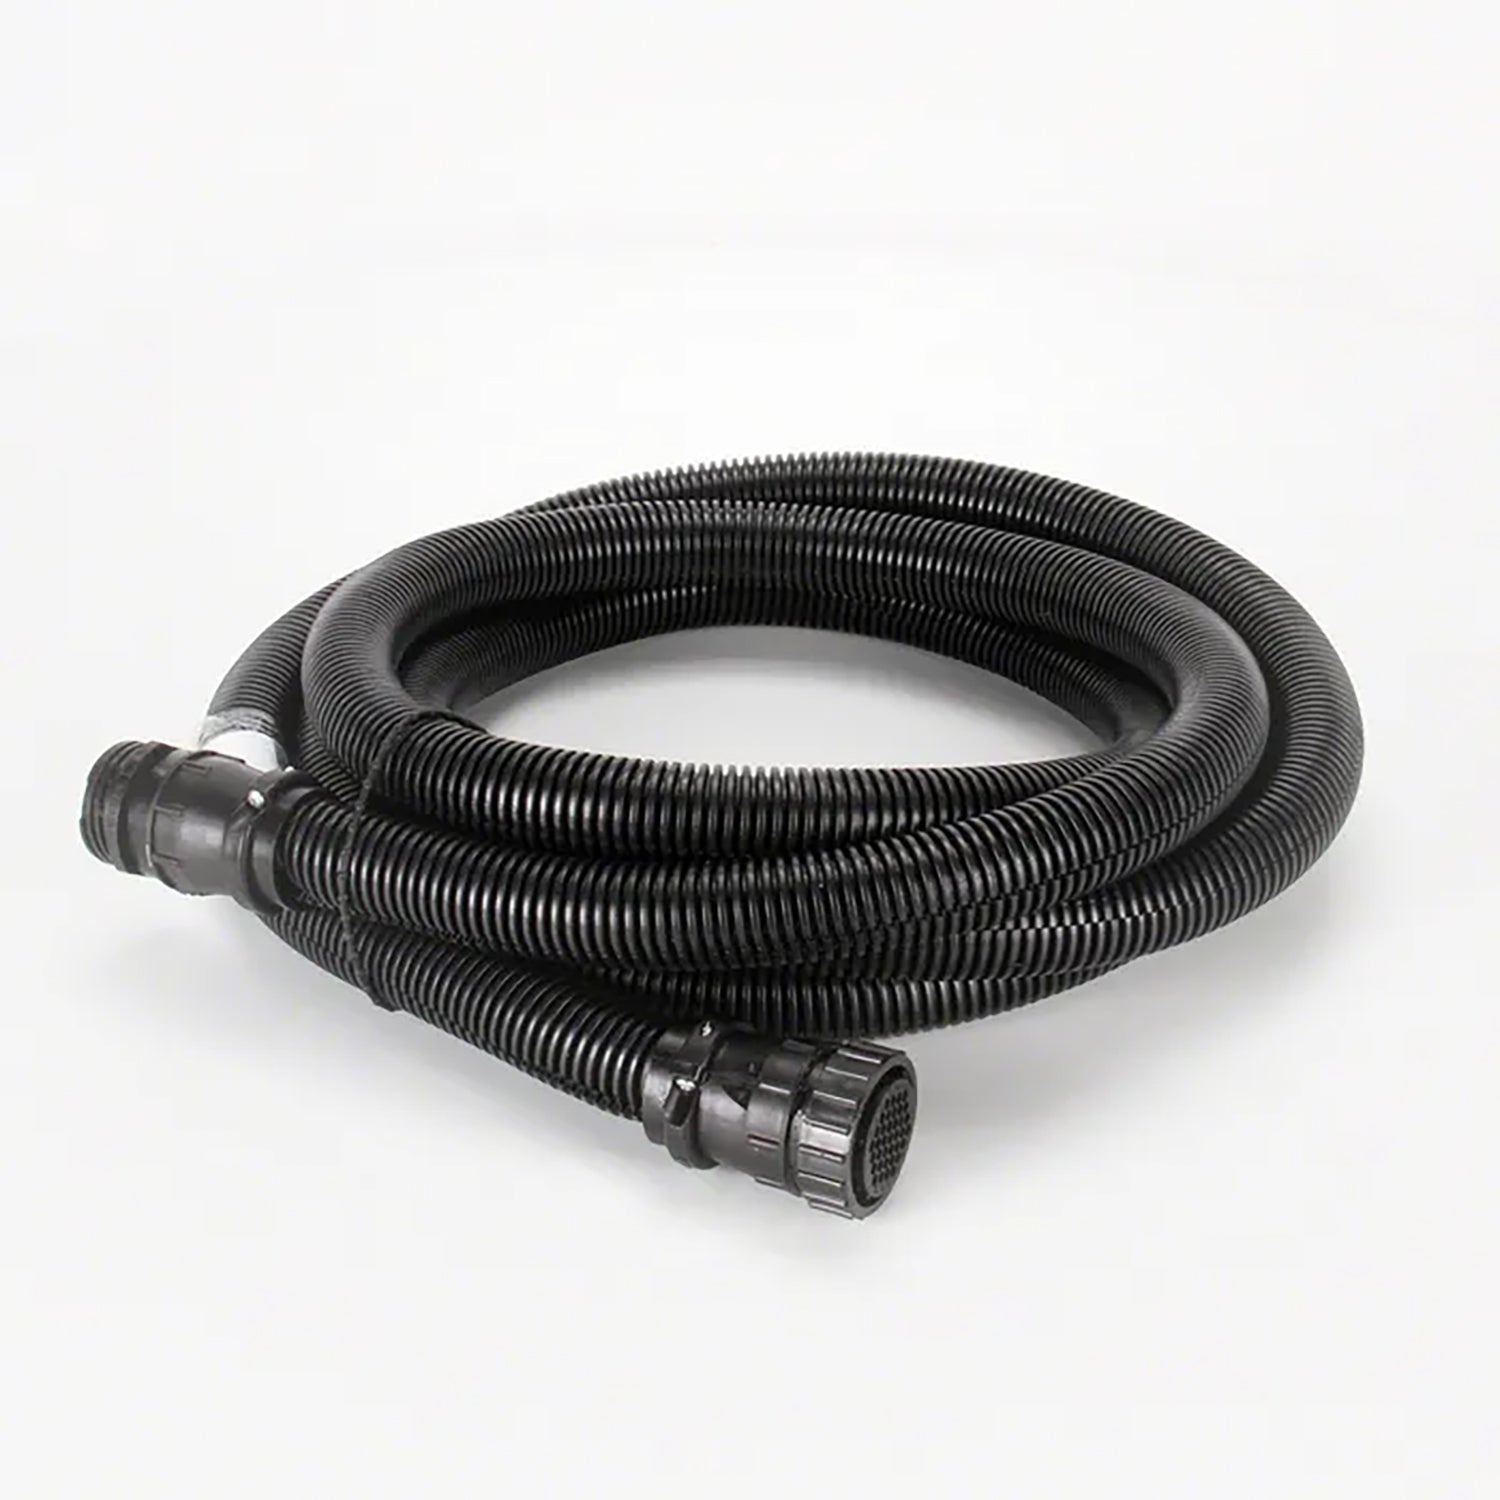 37 Pin Extension Cable for Raven